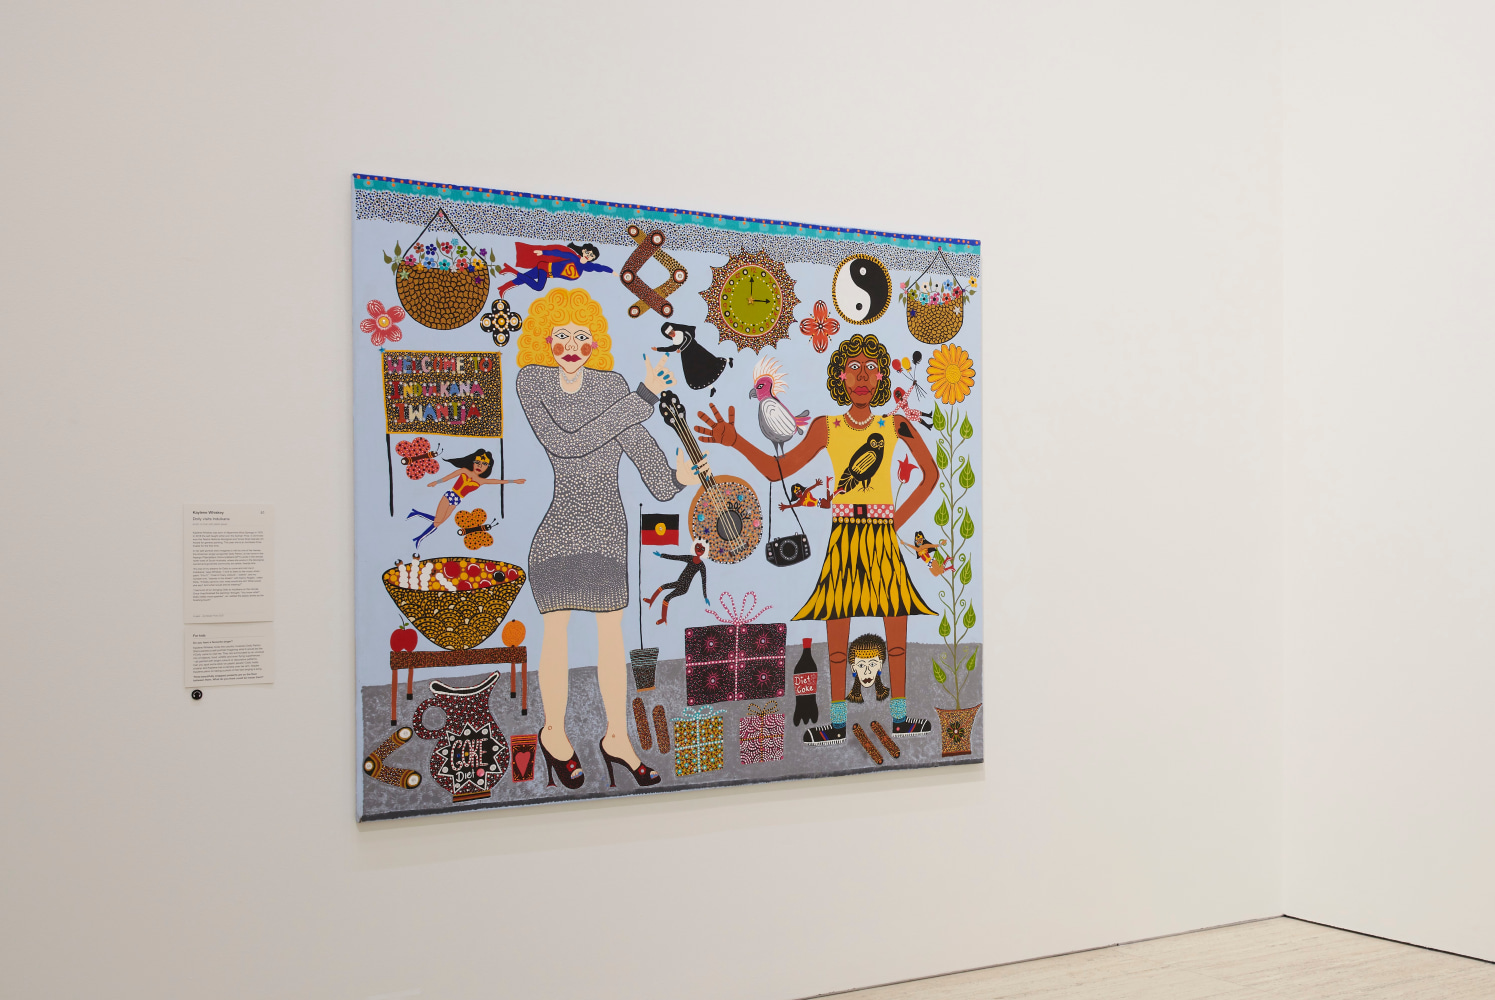 Installation view of Kaylene Whiskey&amp;#39;s Dolly visits lndulkana 2020, on display as part of Archibald Prize 2020 exhibition, at the Art Gallery of New South Wales, 26 September -10 January 2021.&amp;nbsp;
Photo &amp;copy; Art Gallery of New South Wales, Felicity Jenkins.